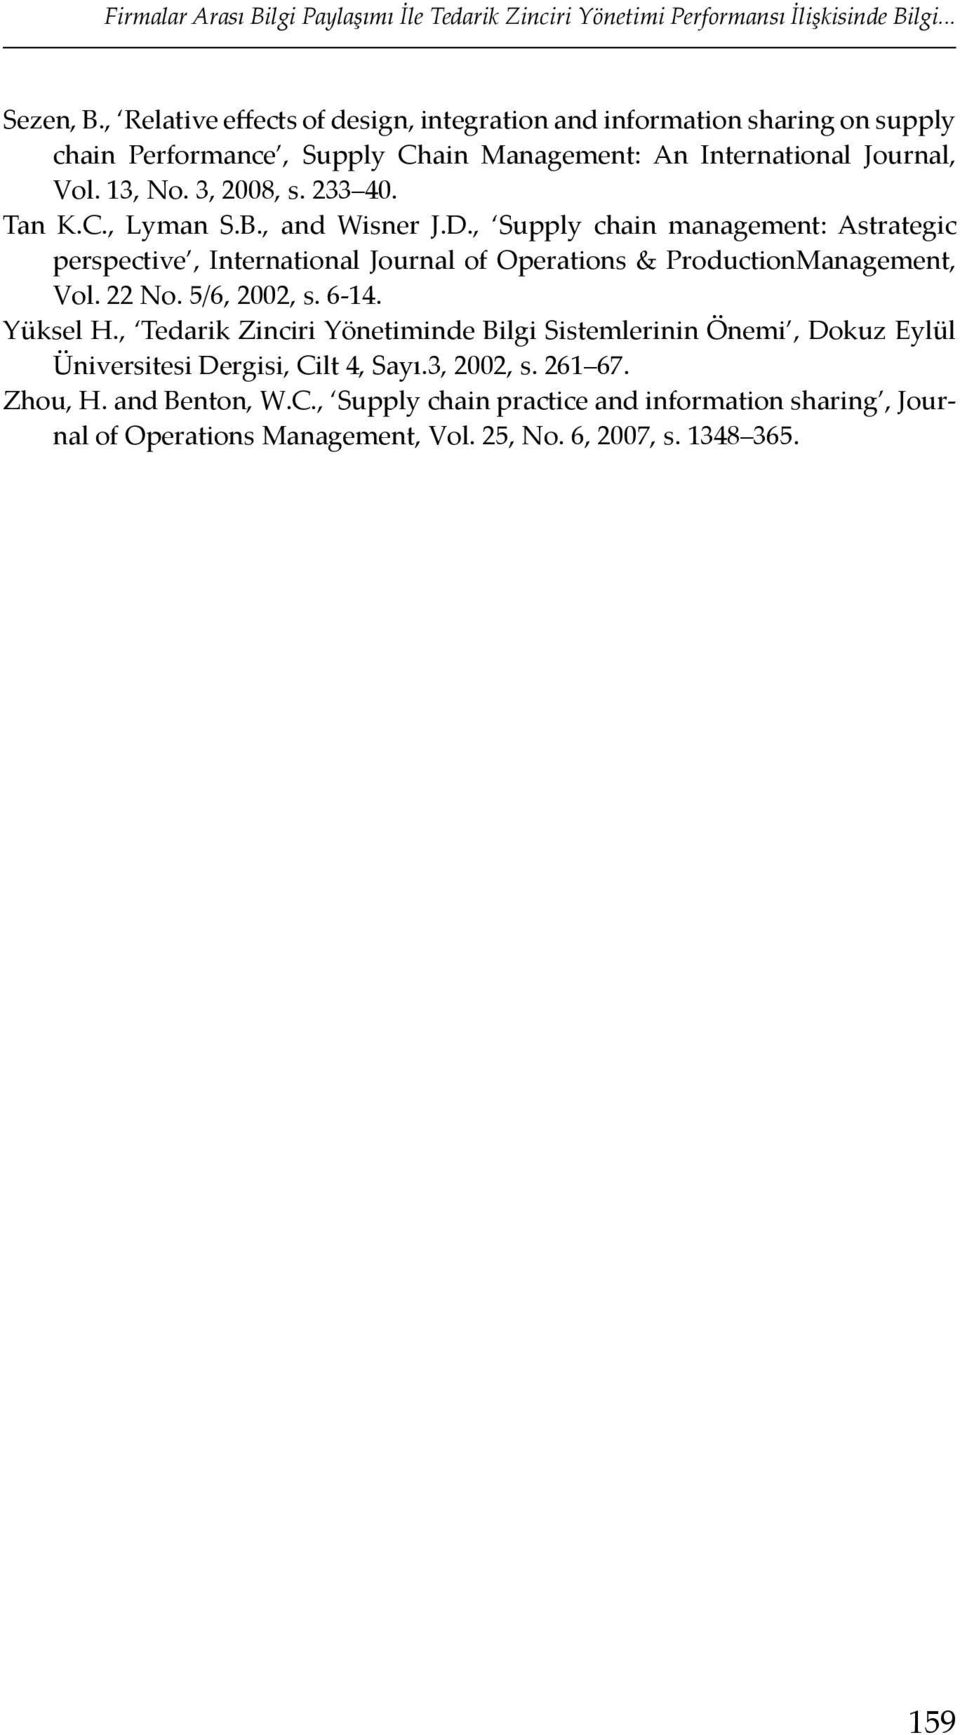 C., Lyman S.B., and Wisner J.D., Supply chain management: Astrategic perspective, International Journal of Operations & ProductionManagement, Vol. 22 No. 5/6, 2002, s. 6-14. Yüksel H.